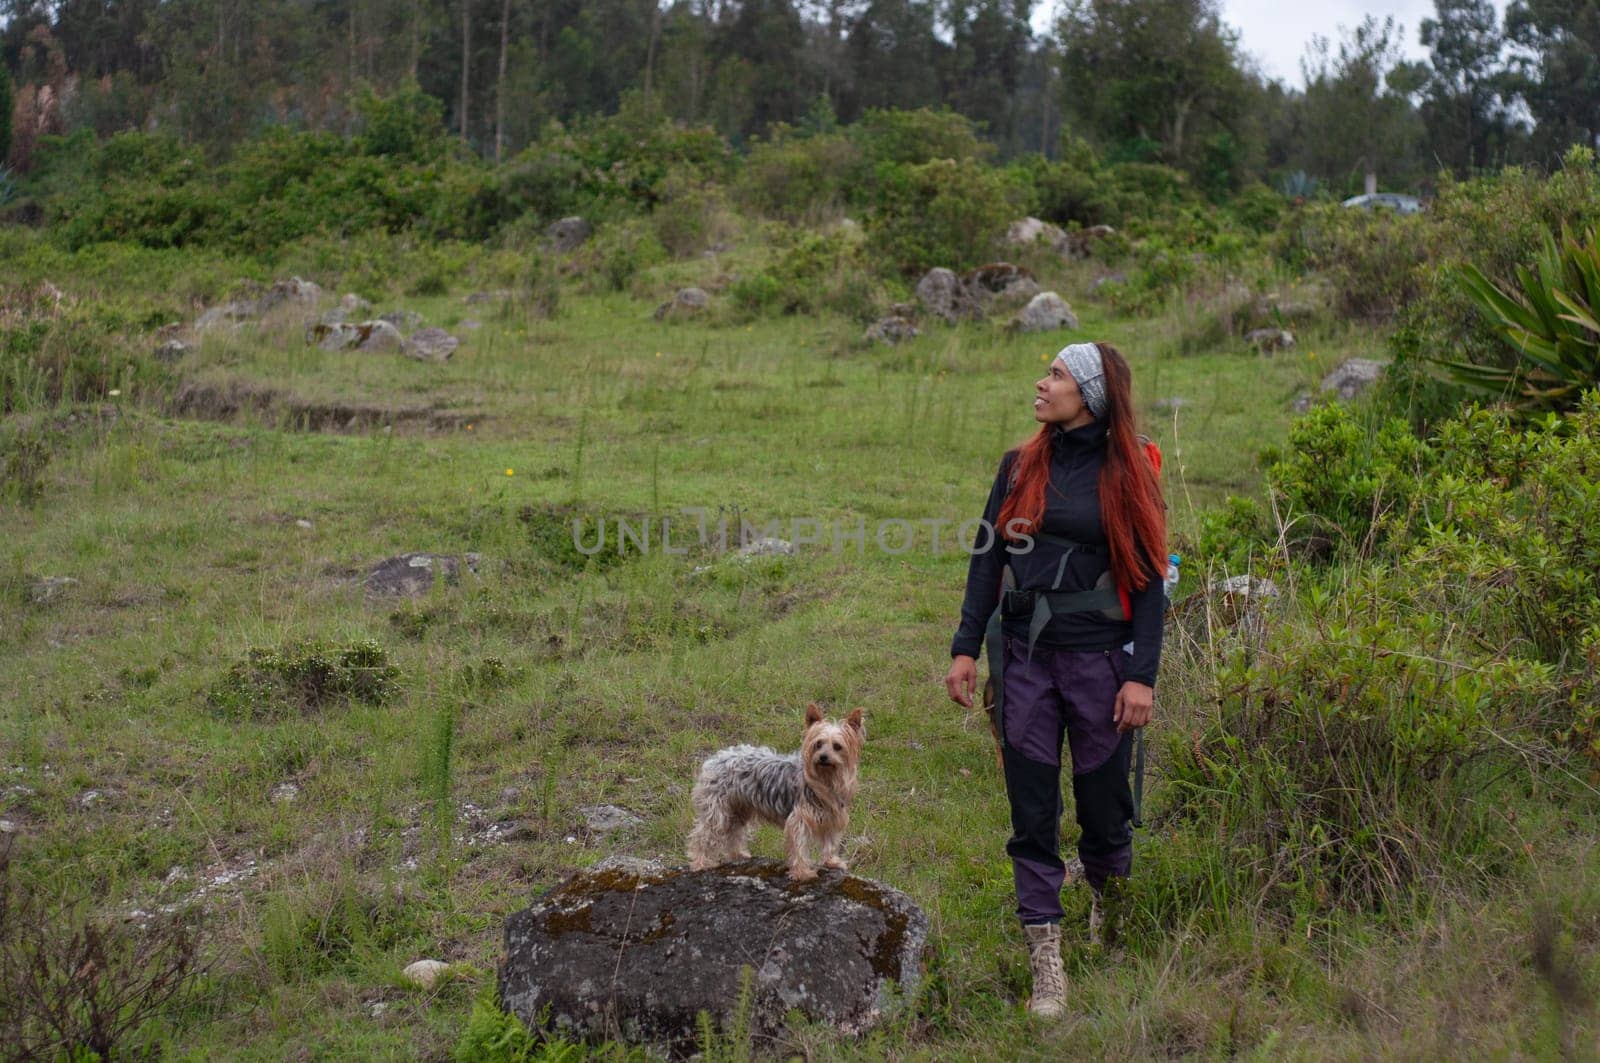 woman explorer admiring the grandeur of the landscape while her dog is on a large rock by Raulmartin